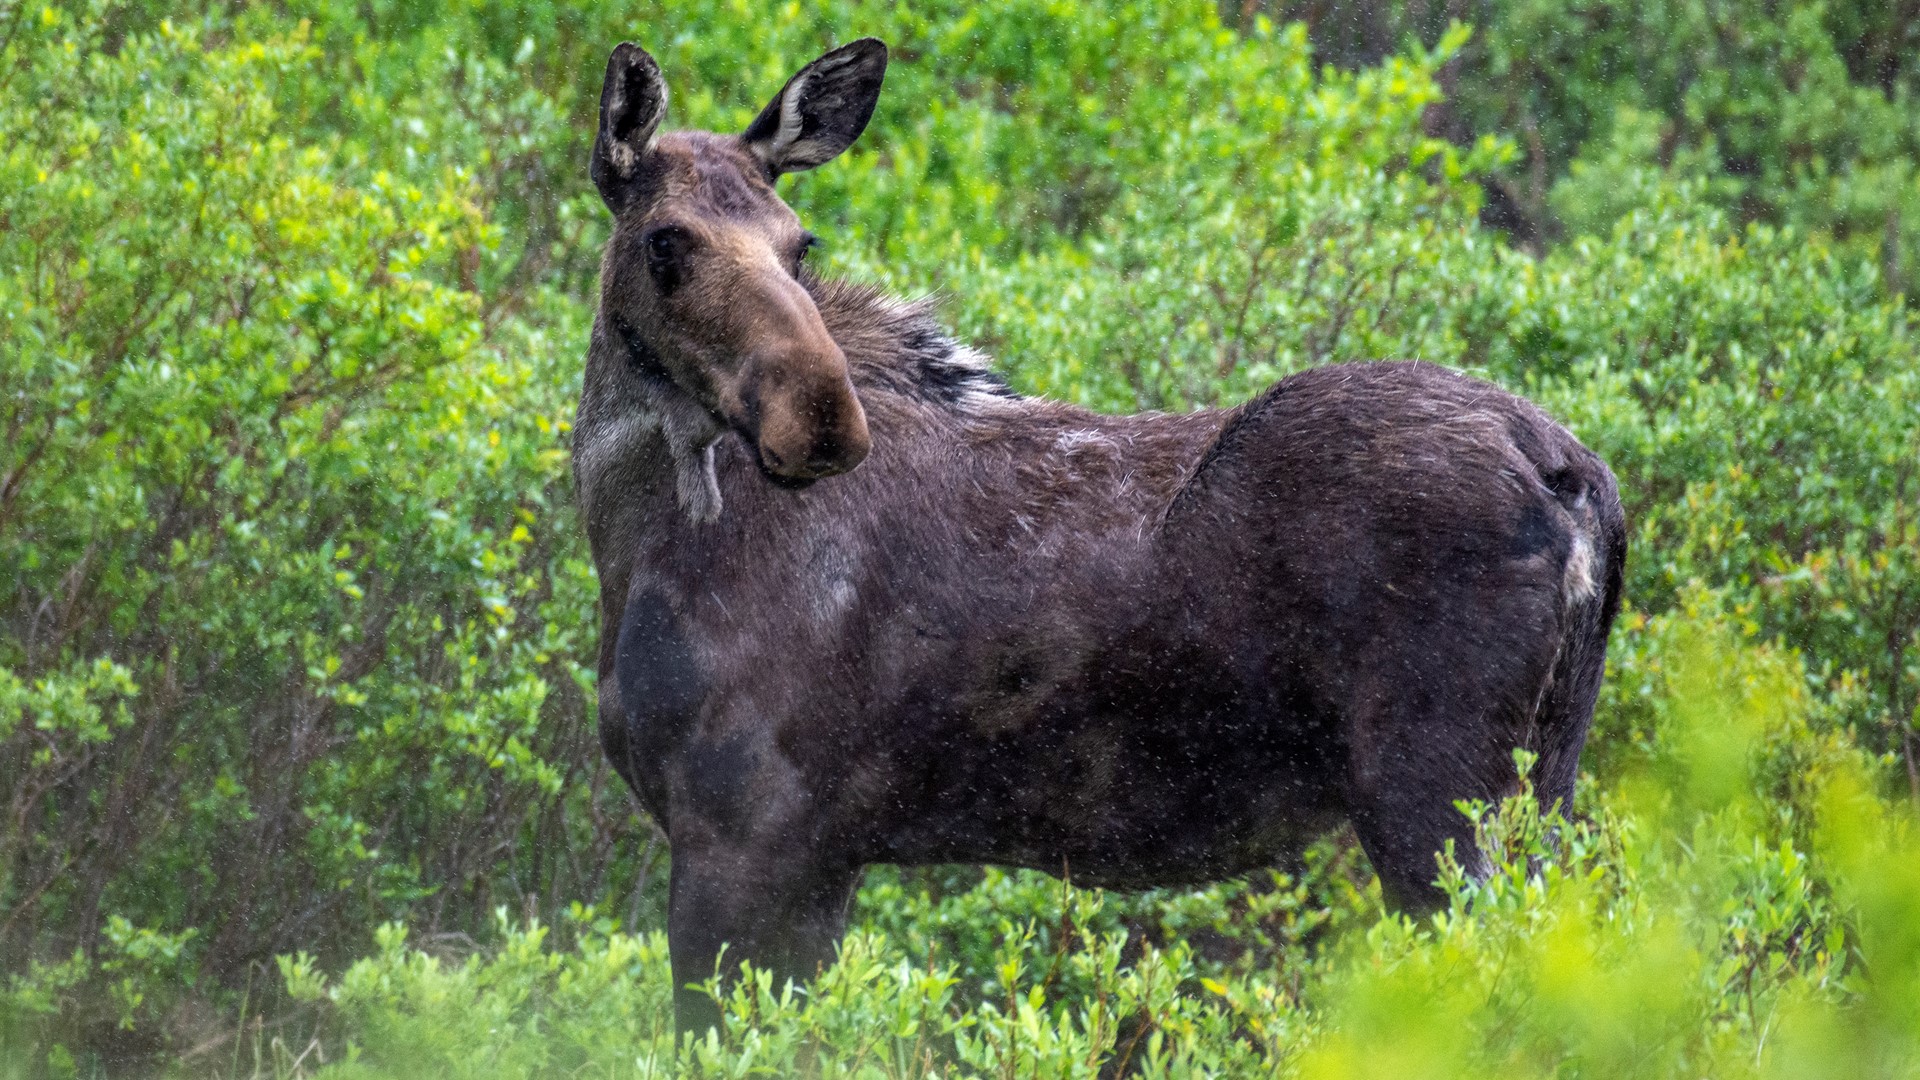 CPW said the man was walking dogs in Coal Creek Canyon when he went around a hairpin turn in the trail and surprised a cow moose and calf.